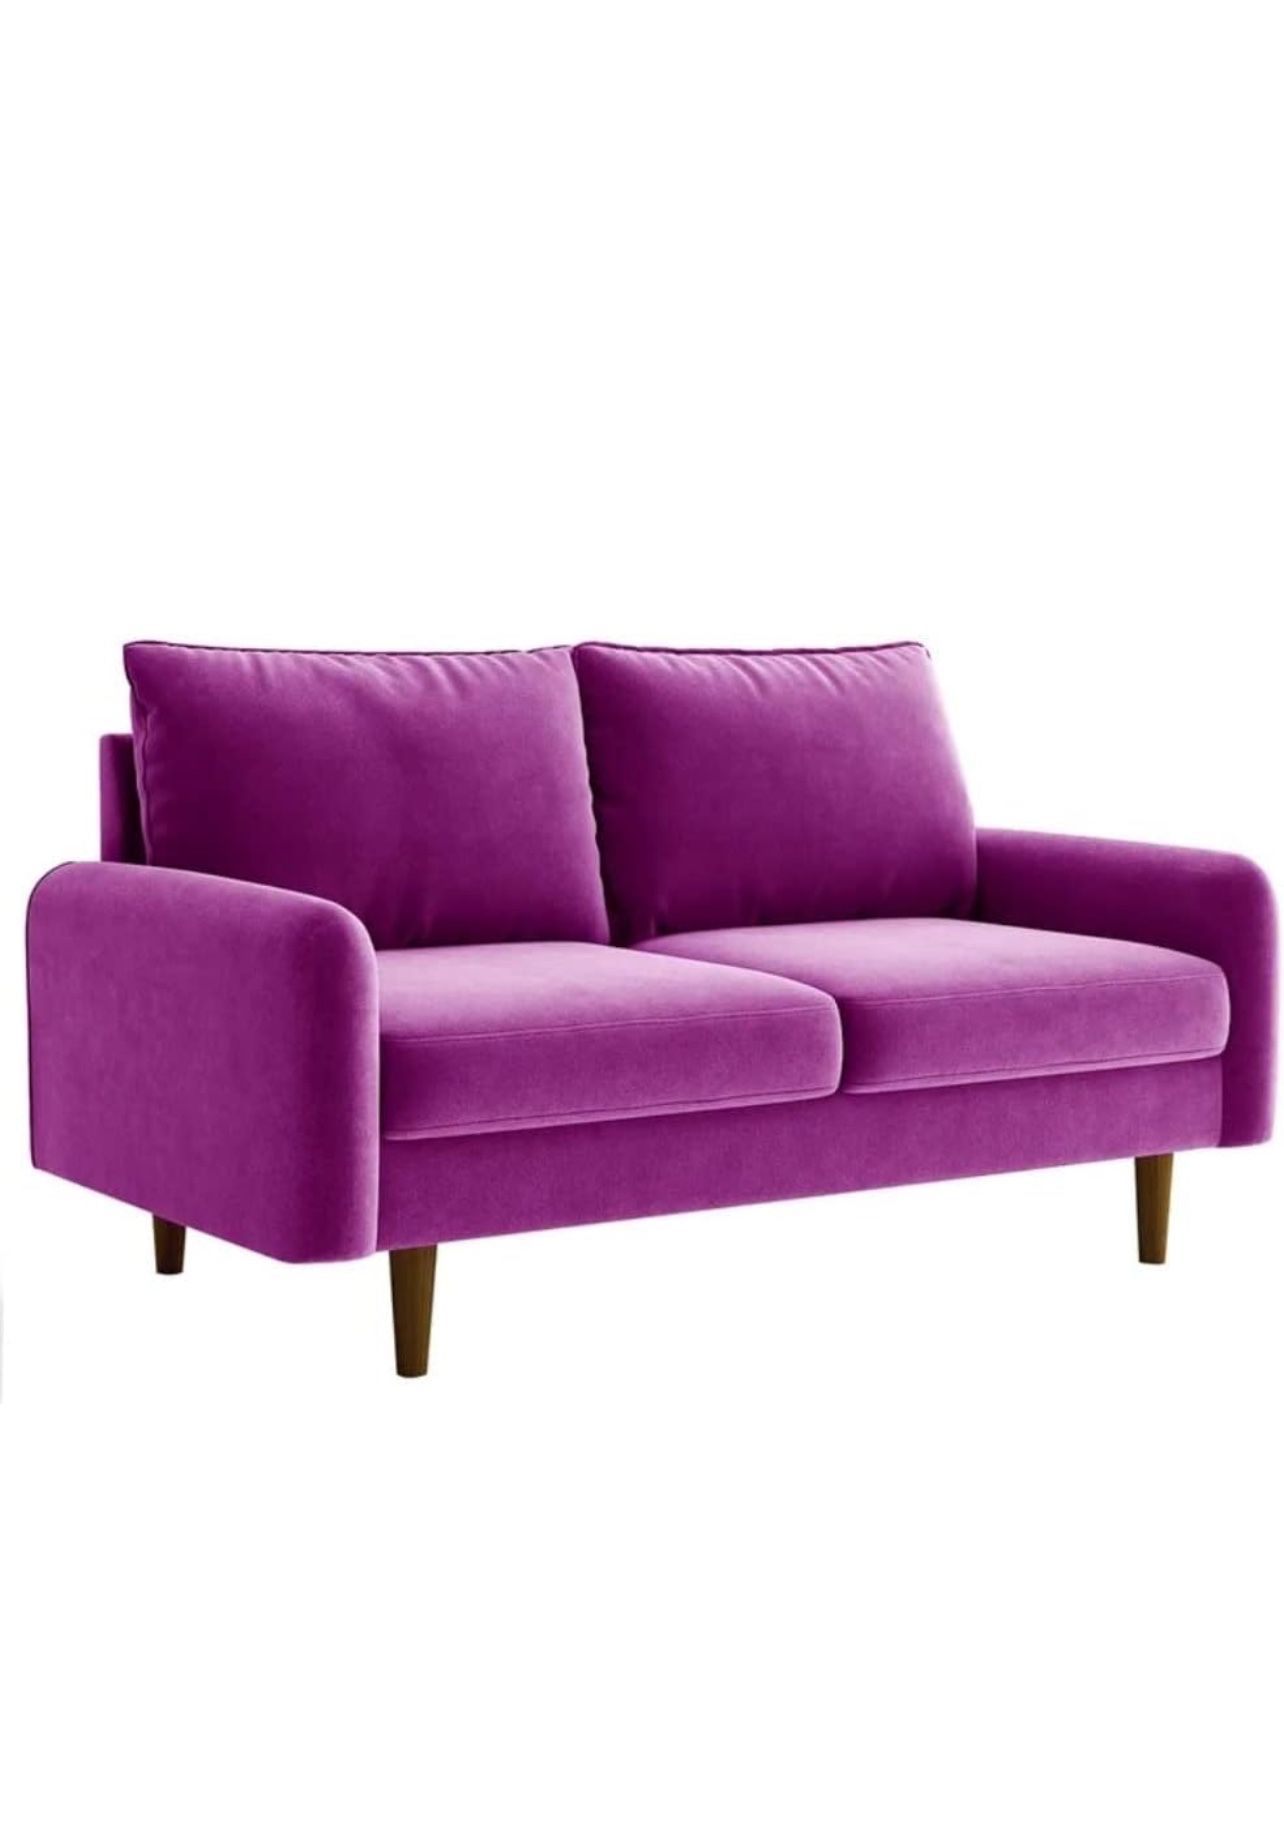  Sofa Couch For Livingroom 56.3" Wide |Velvet Loveseat Couch With Comfortable Square Arms, Foam Filled Tufted Seat & Removable Back Cushions | Pretty 